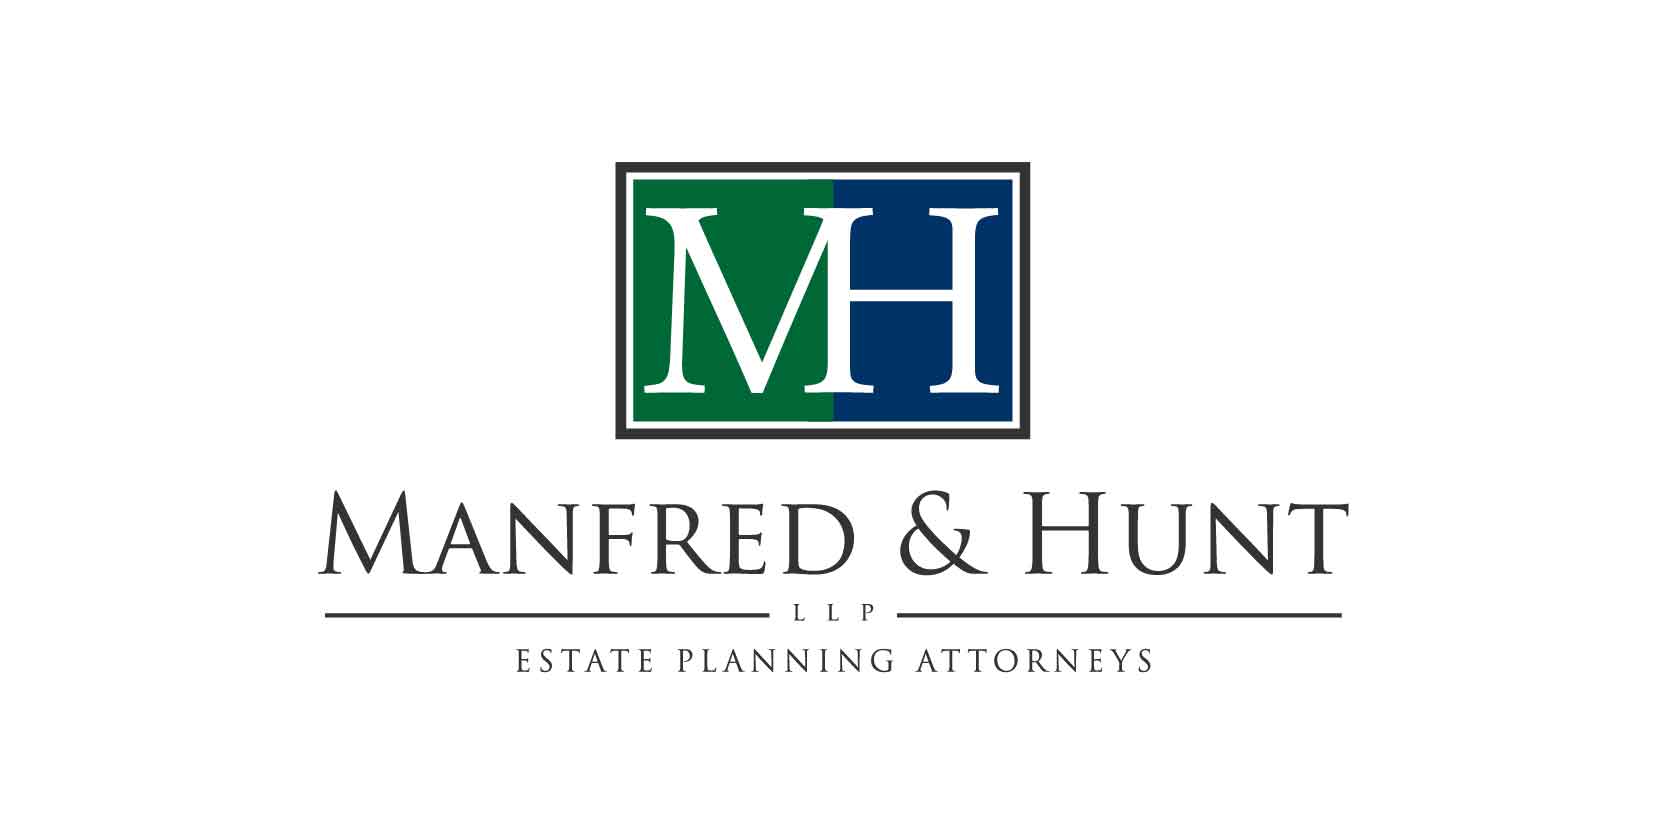 D. Manfred & Hunt, LLP (Silver)